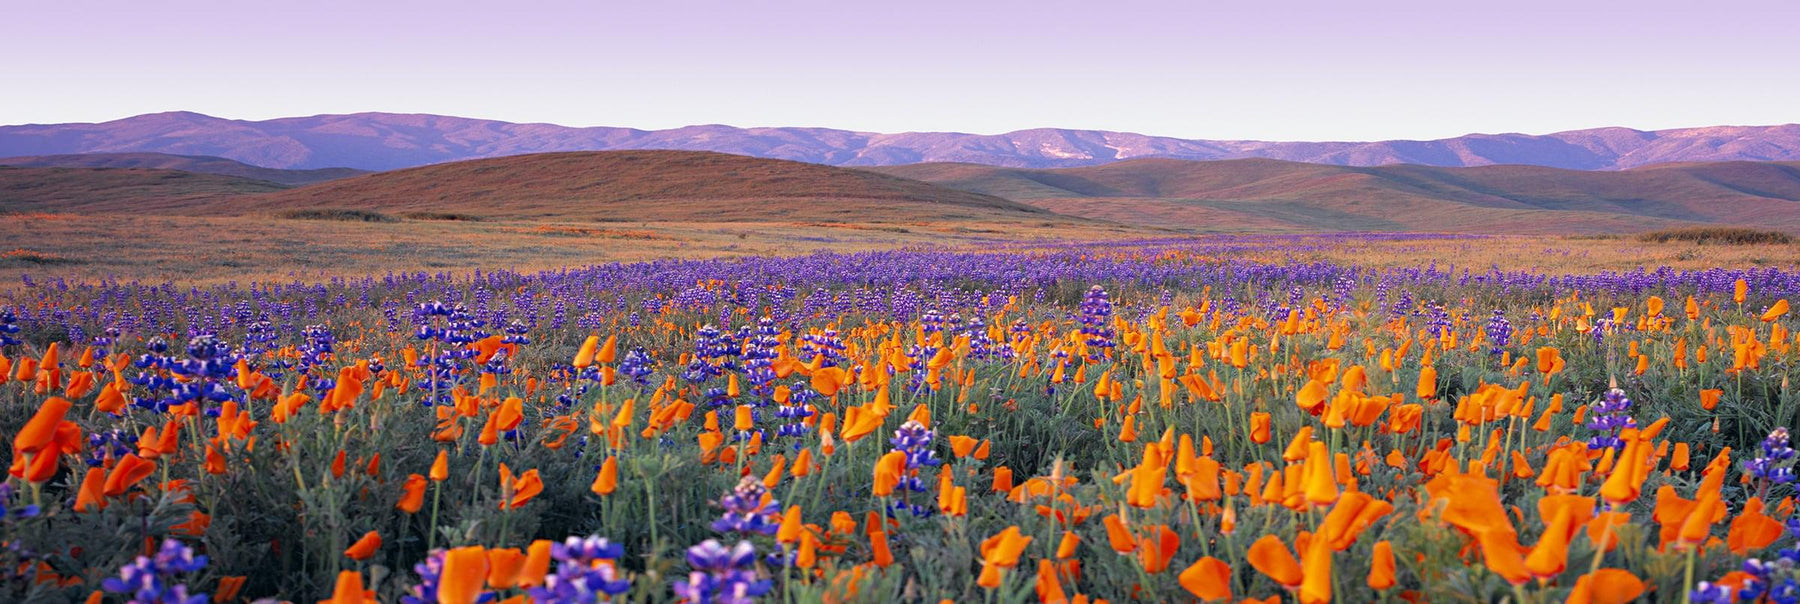 Orange and purple poppy fields along the rolling hills of Carrizo Plain National Park California